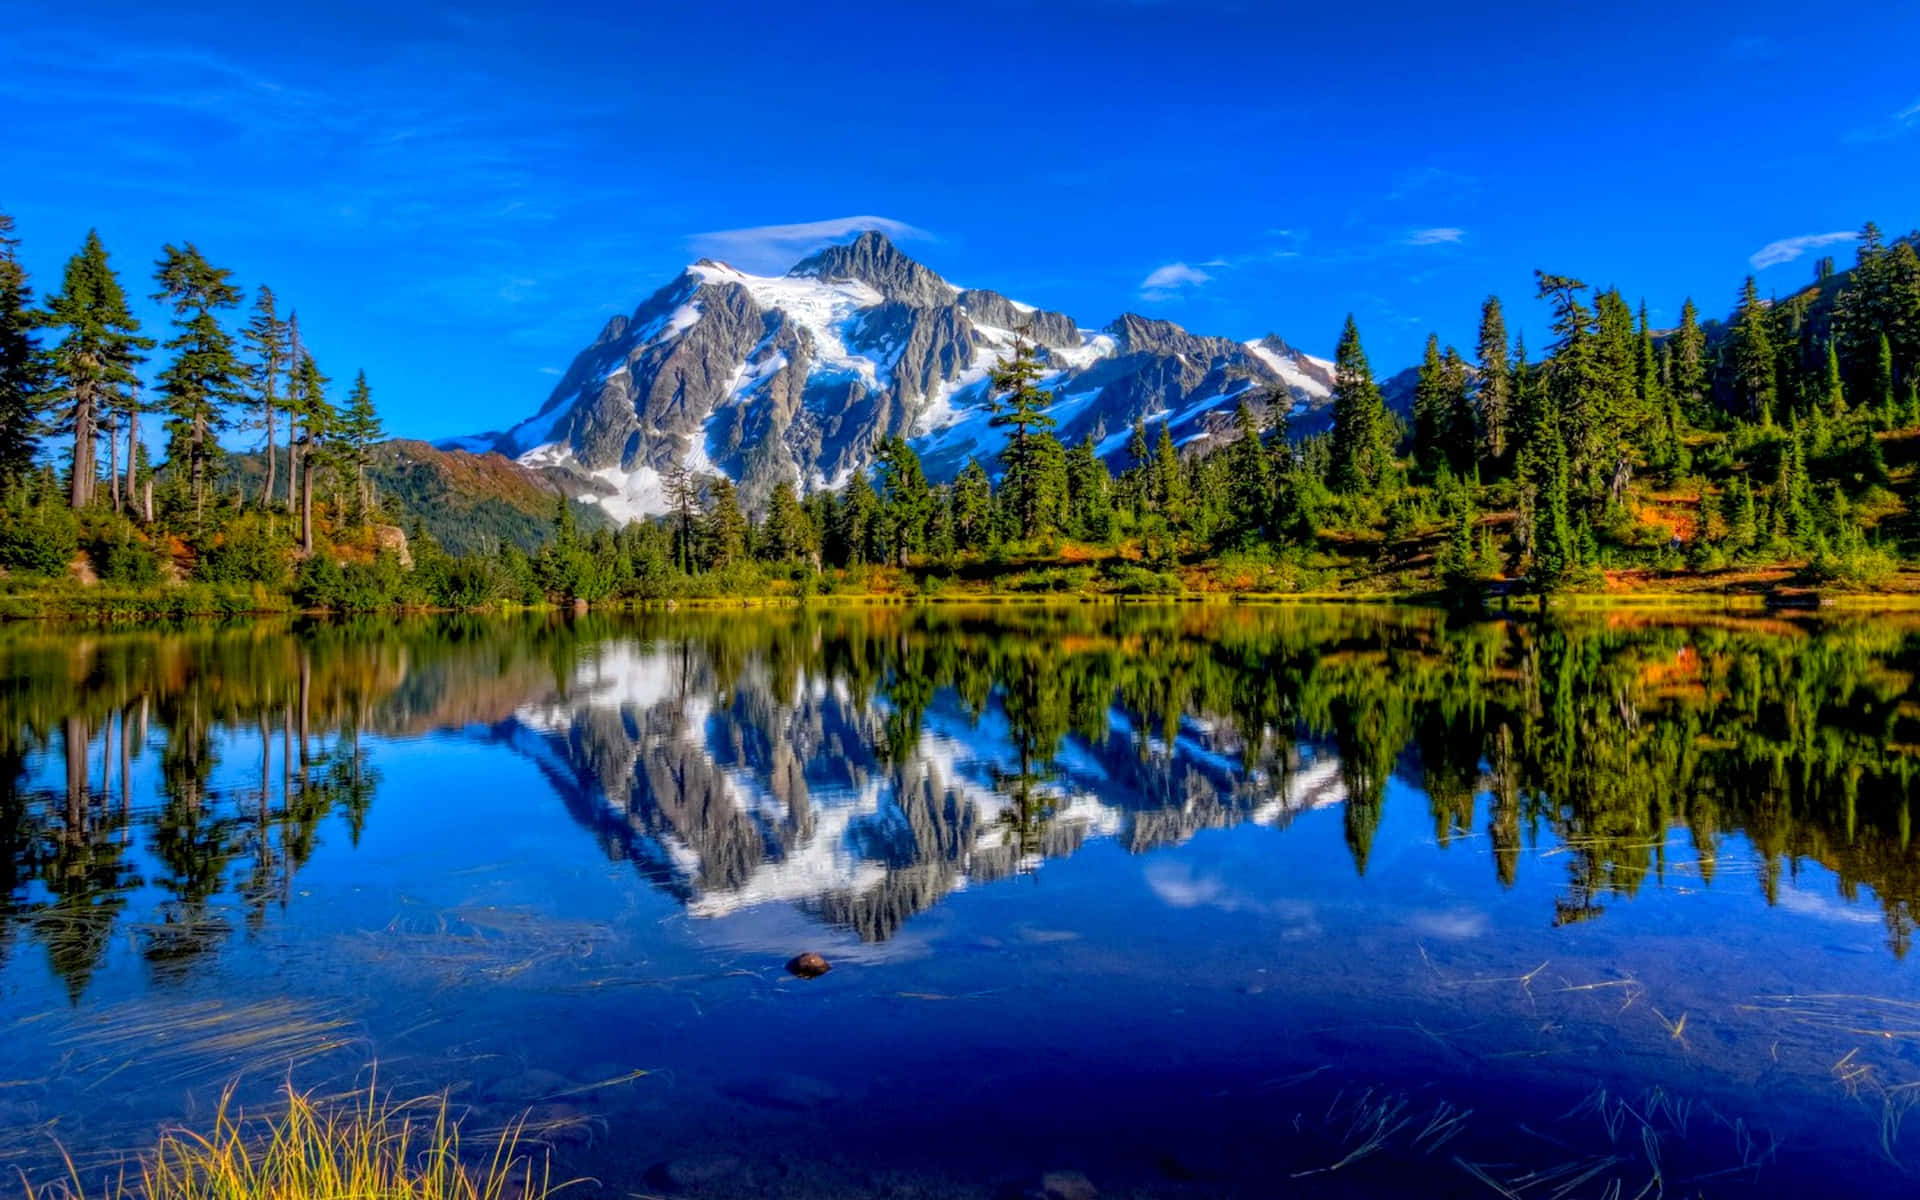 Nature's Beauty: A Brief Moment of Calm at a Mountain Lake